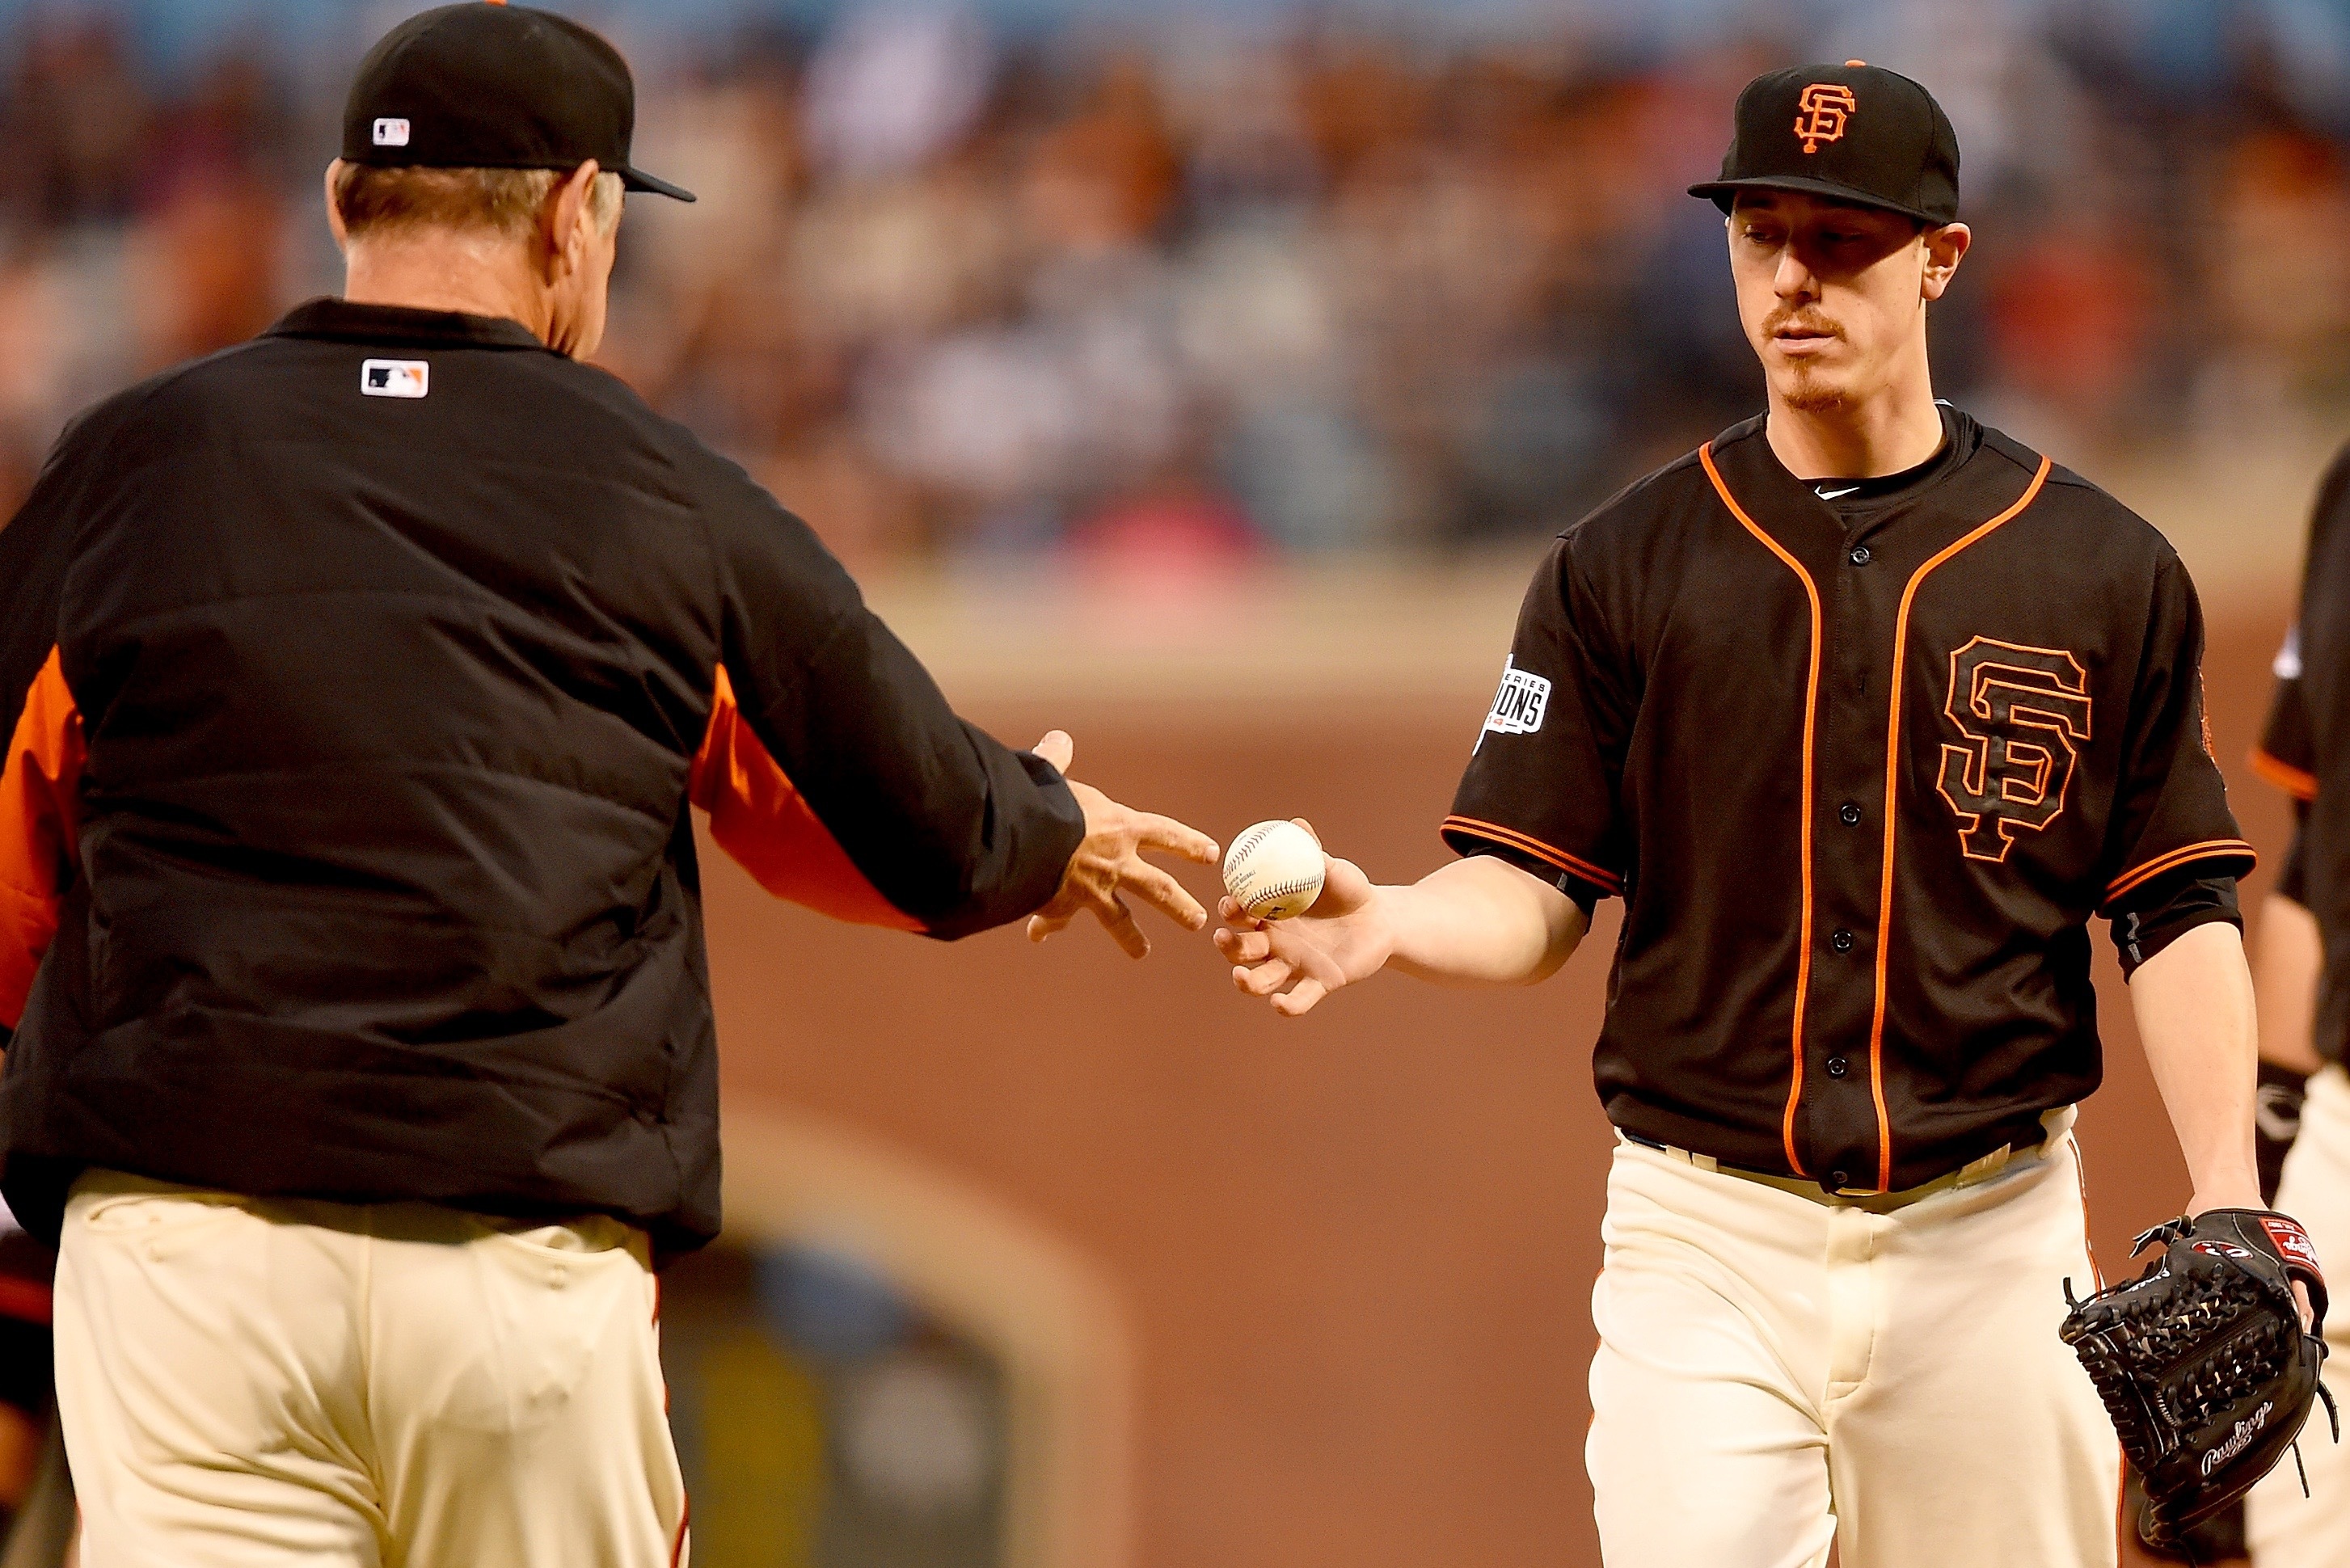 Is Tim Lincecum back? Well, you could say The Freak has never been